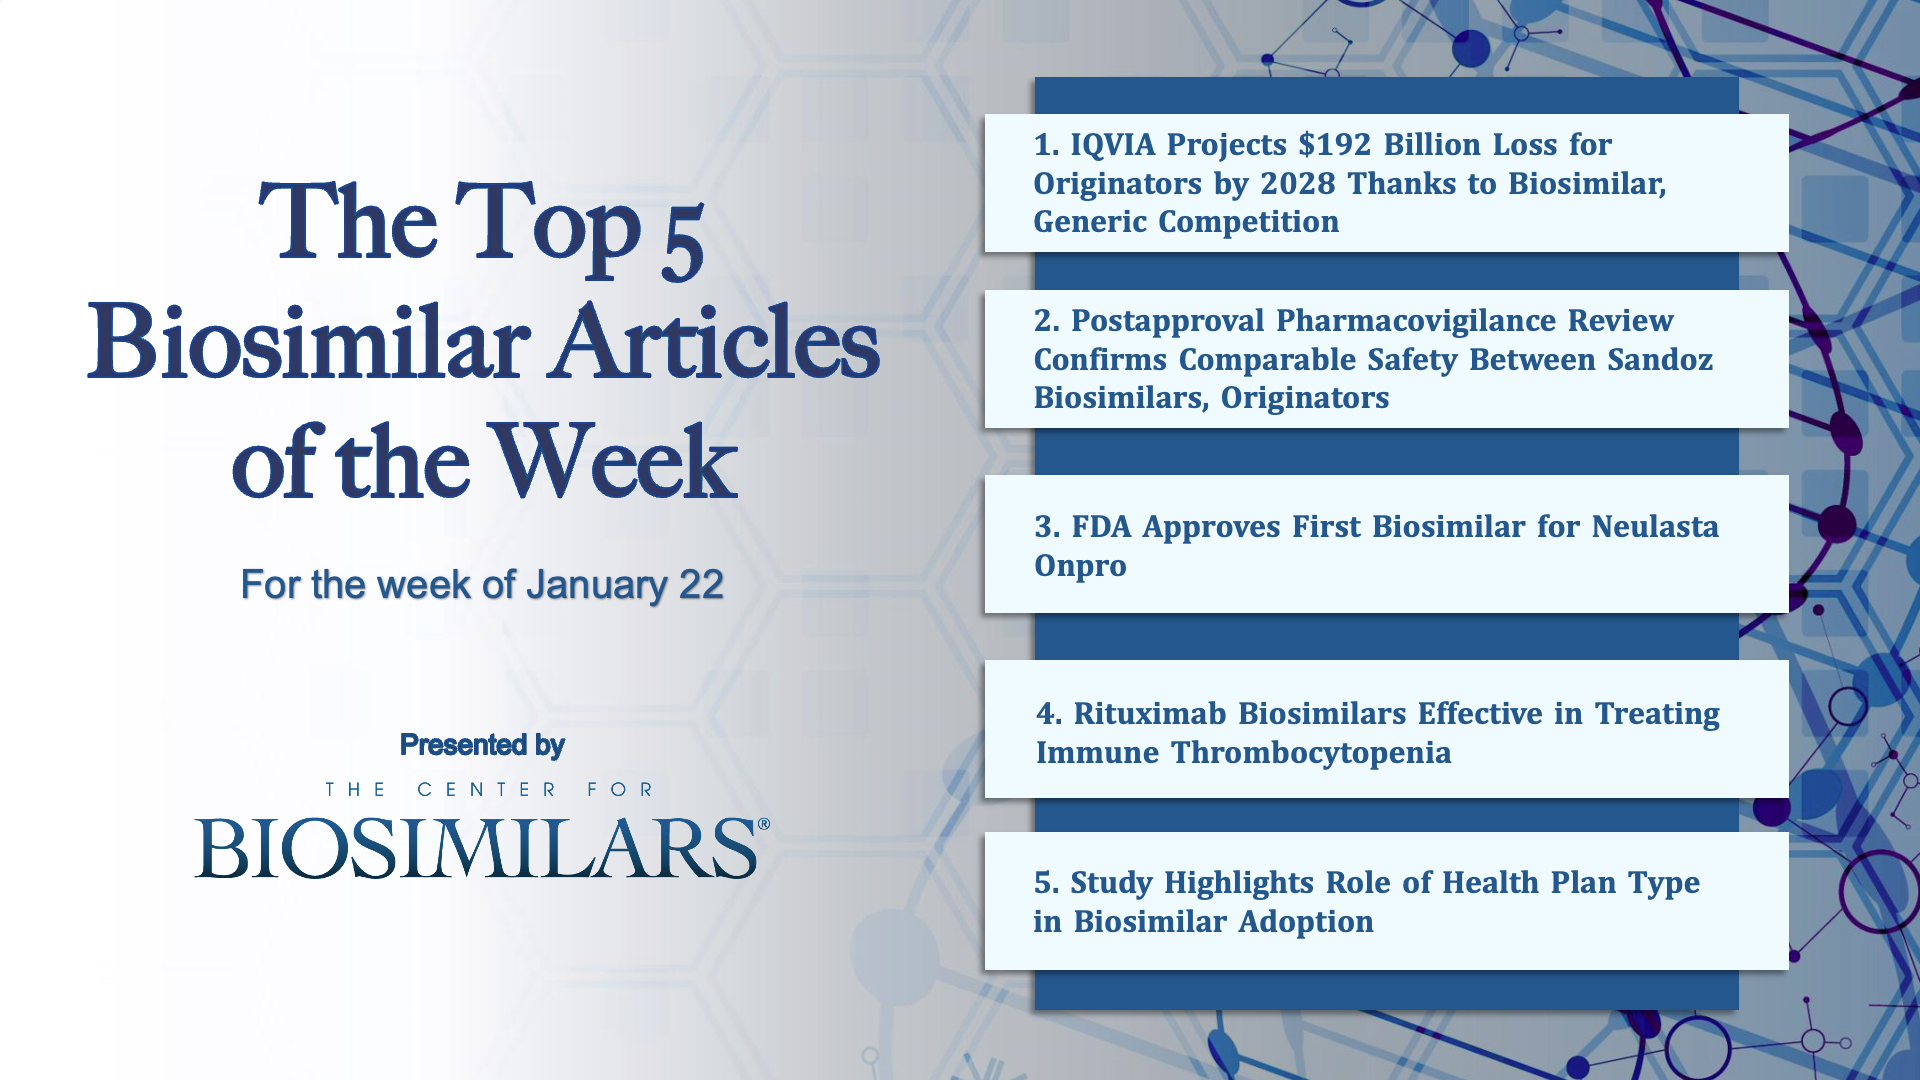 The Top 5 Biosimilar Articles for the Week of January 22